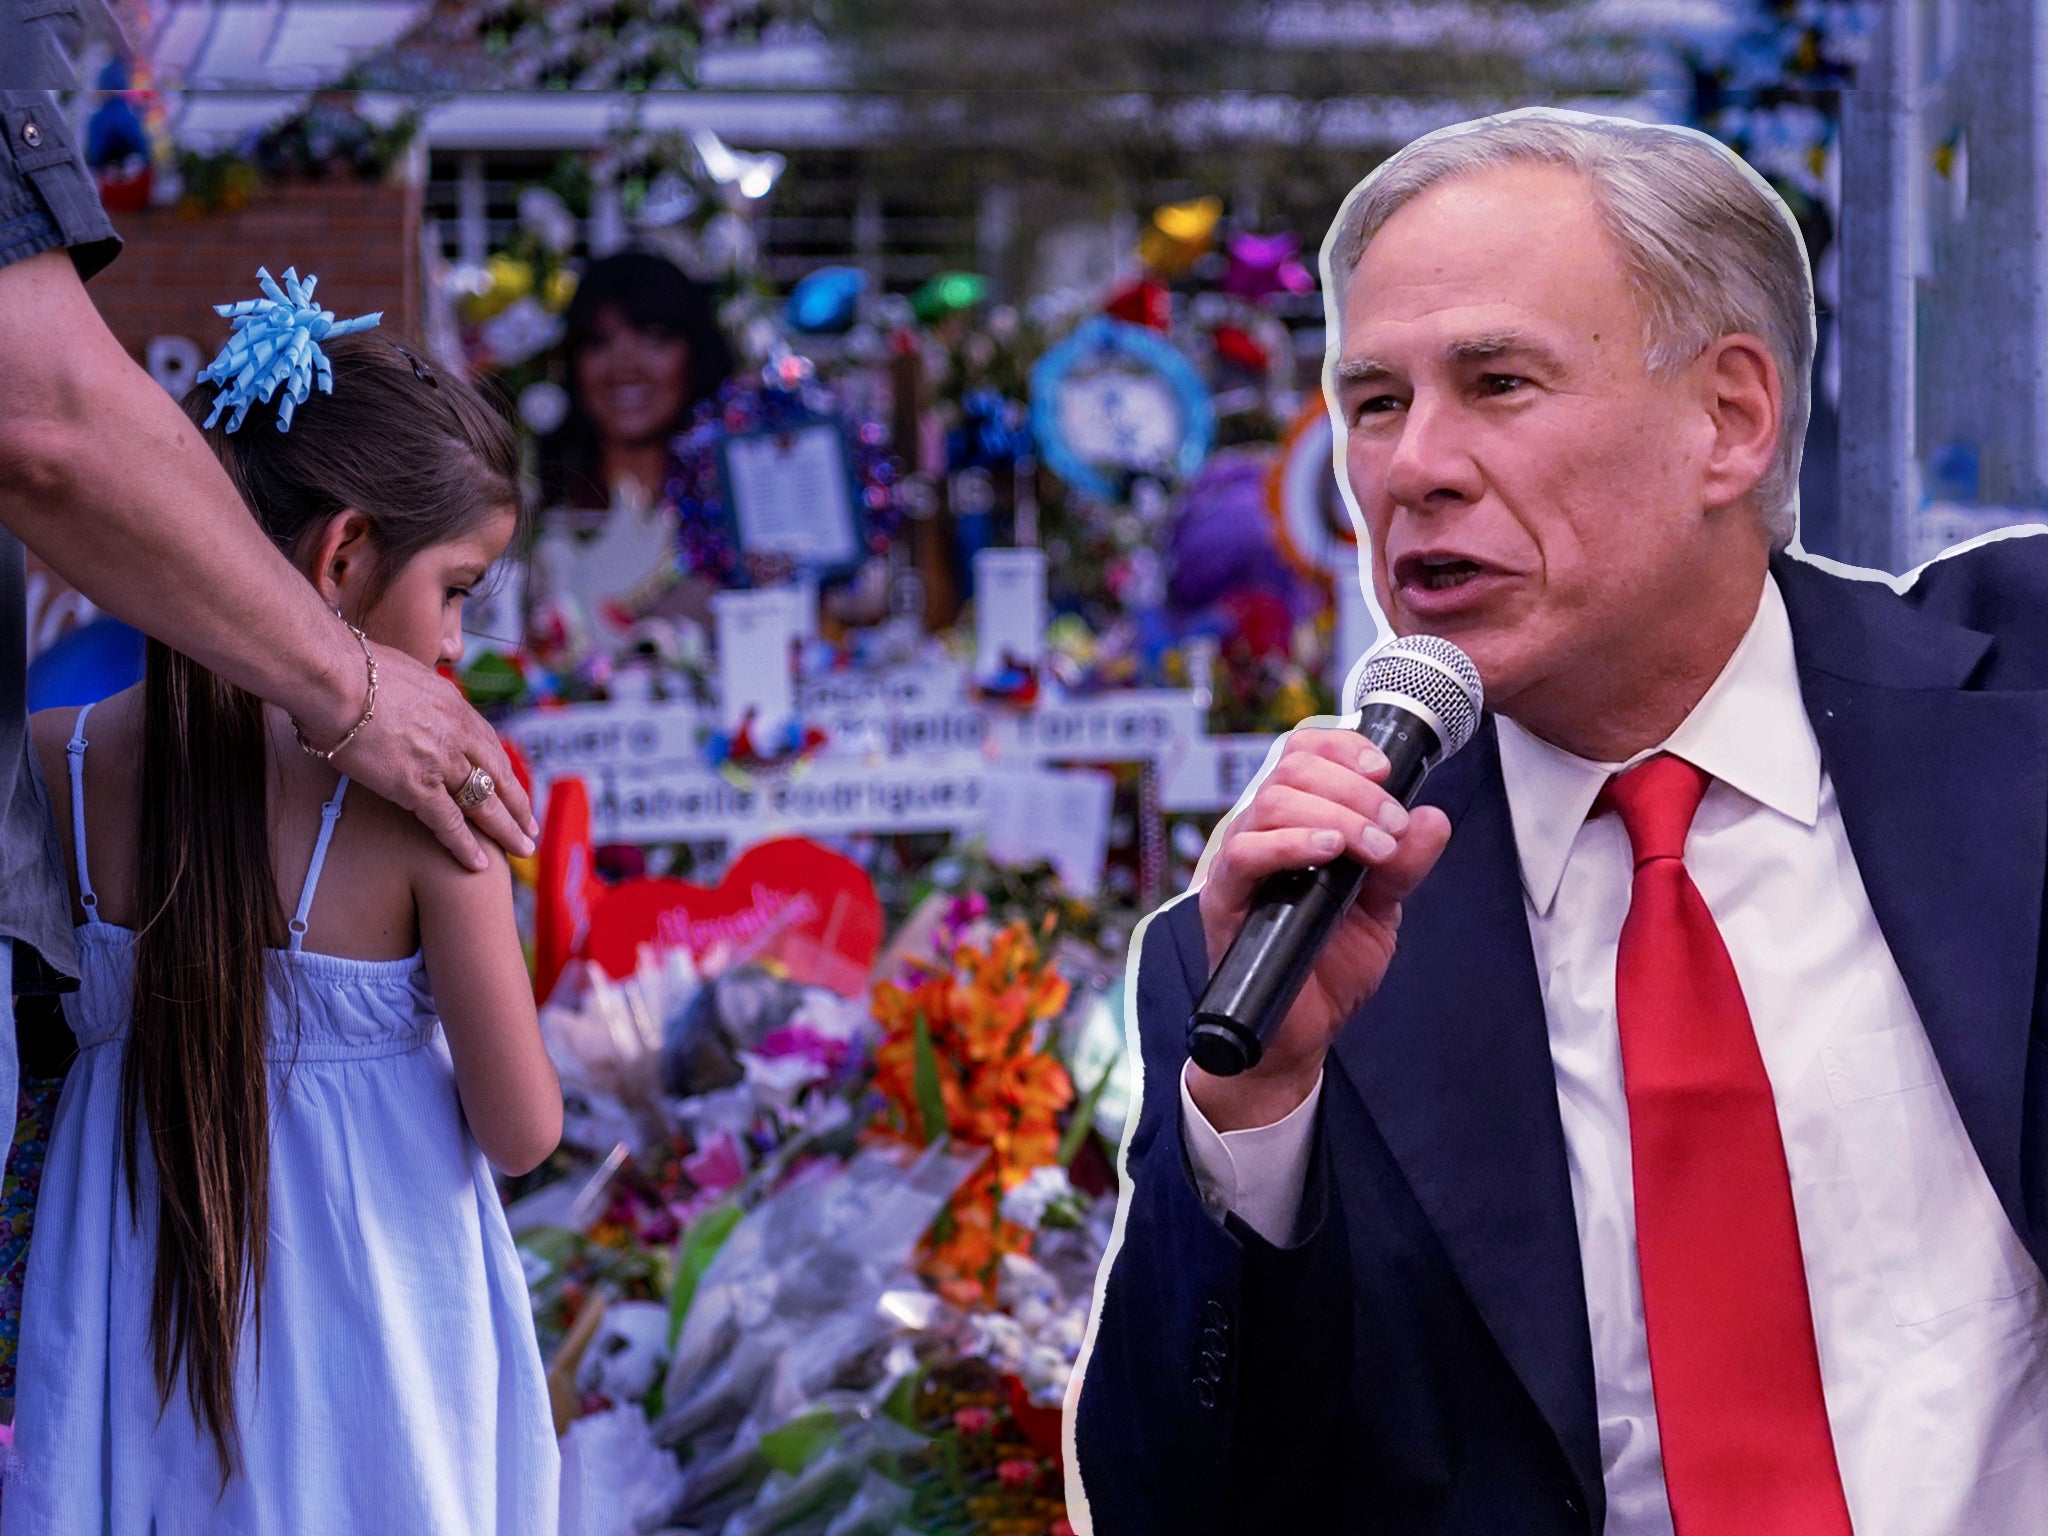 Greg Abbott was slammed for his actions or inactions after Uvalde